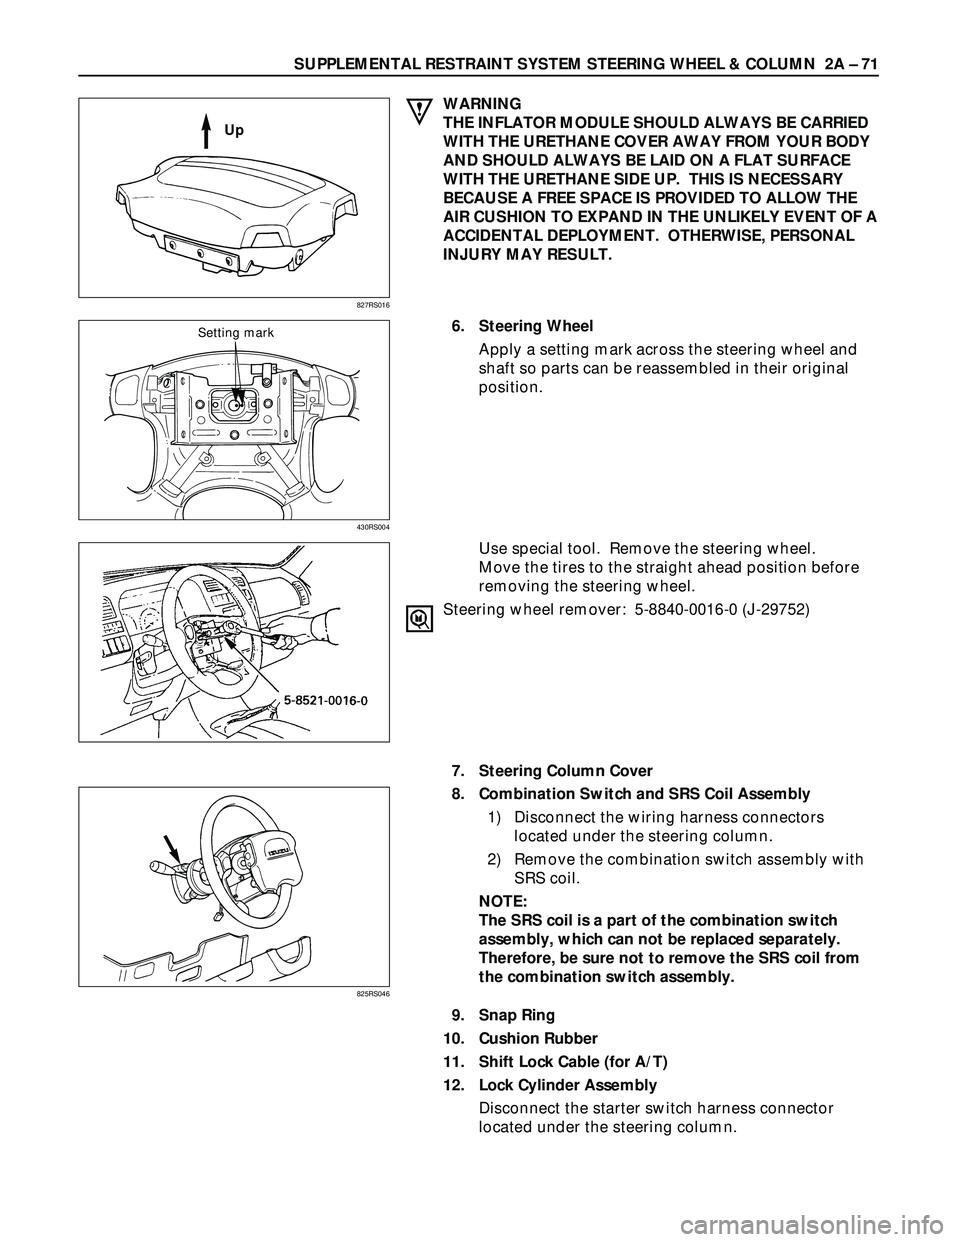 ISUZU TROOPER 1998  Service User Guide SUPPLEMENTAL RESTRAINT SYSTEM STEERING WHEEL & COLUMN  2A – 71
WARNING
THE INFLATOR MODULE SHOULD ALWAYS BE CARRIED
WITH THE URETHANE COVER AWAY FROM YOUR BODY
AND SHOULD ALWAYS BE LAID ON A FLAT SU